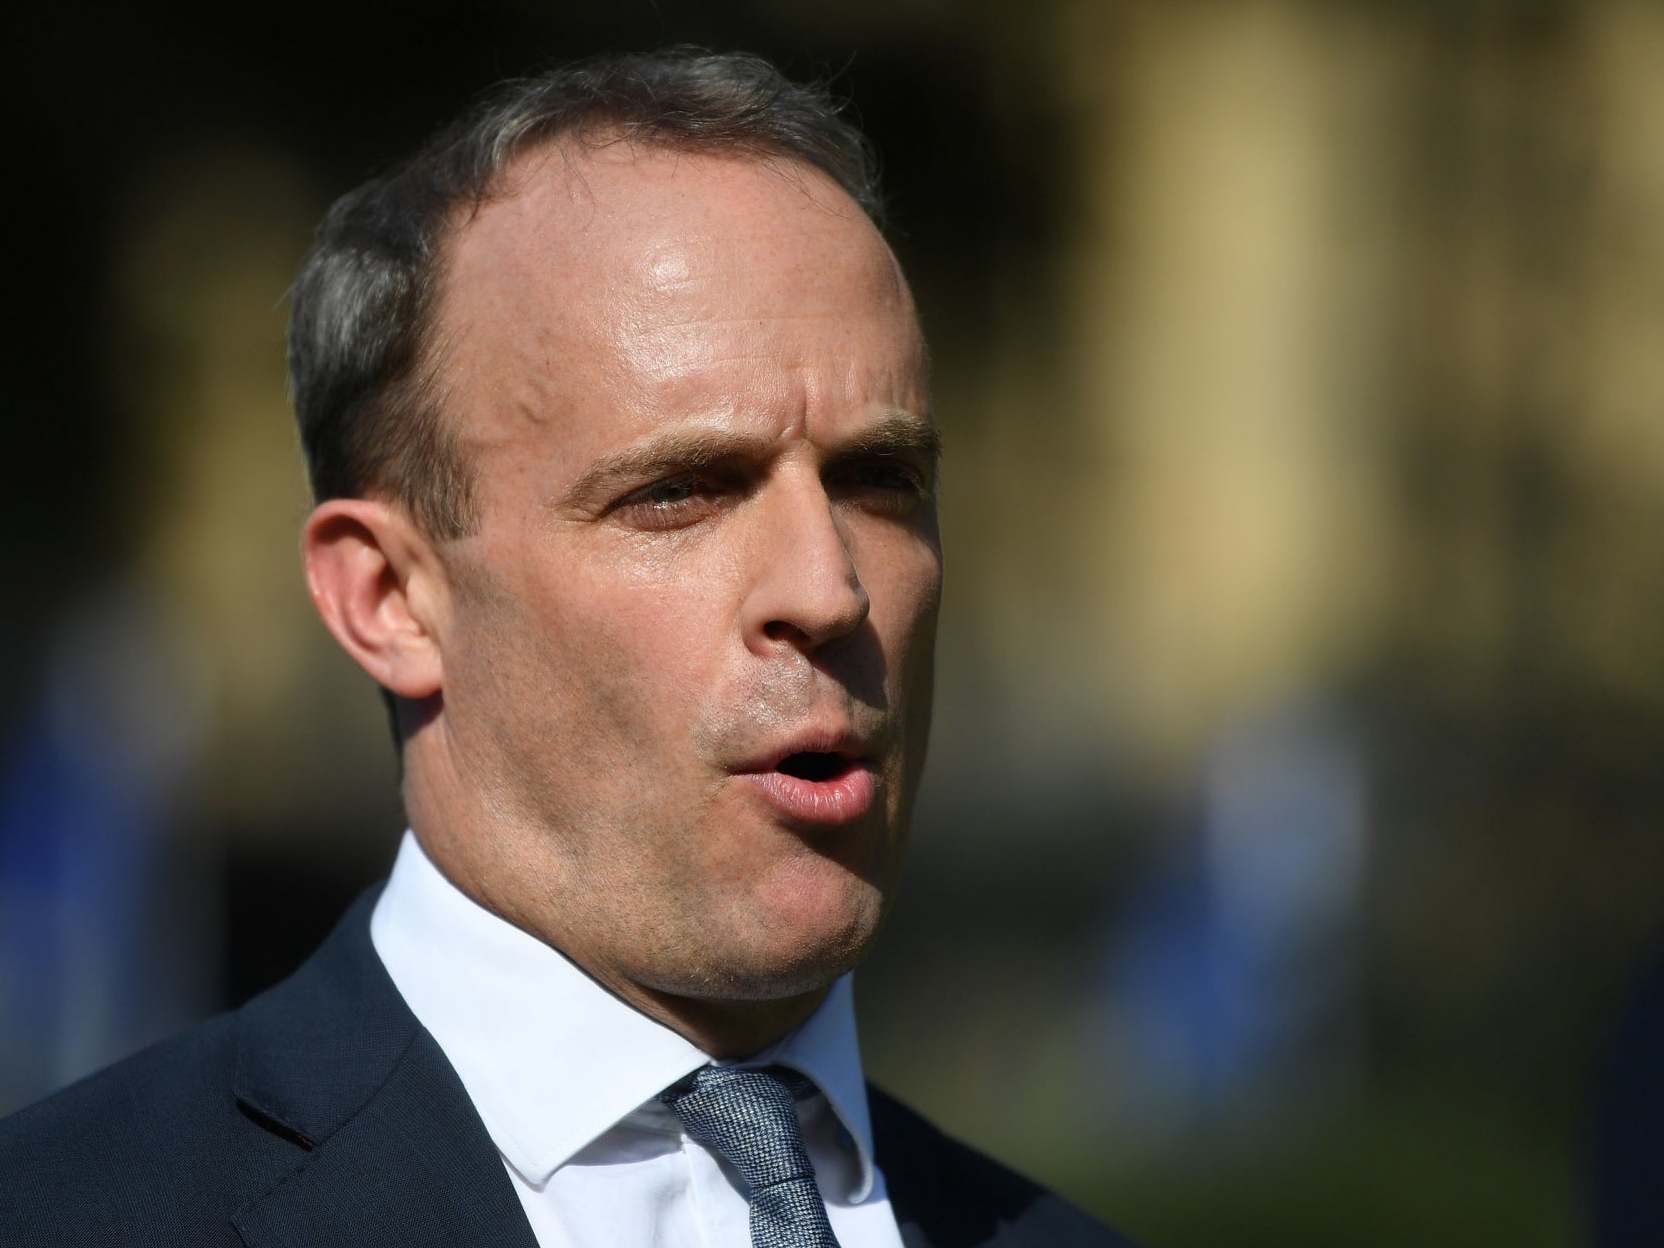 Dominic Raab’s vision on alliances is not credible